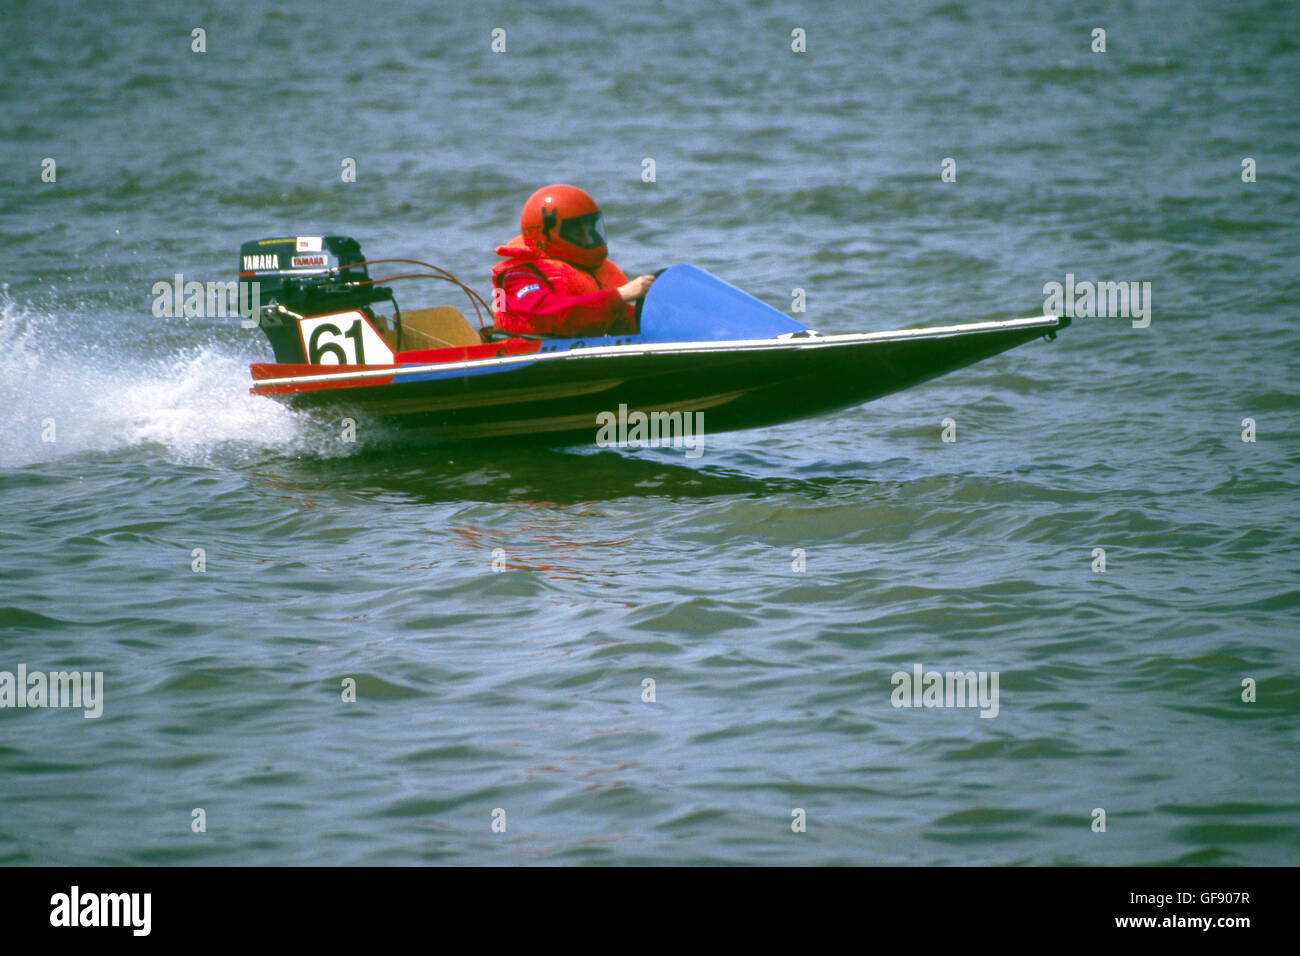 Power boat racing, Oulton Broad, Suffolk, England Stock Photo